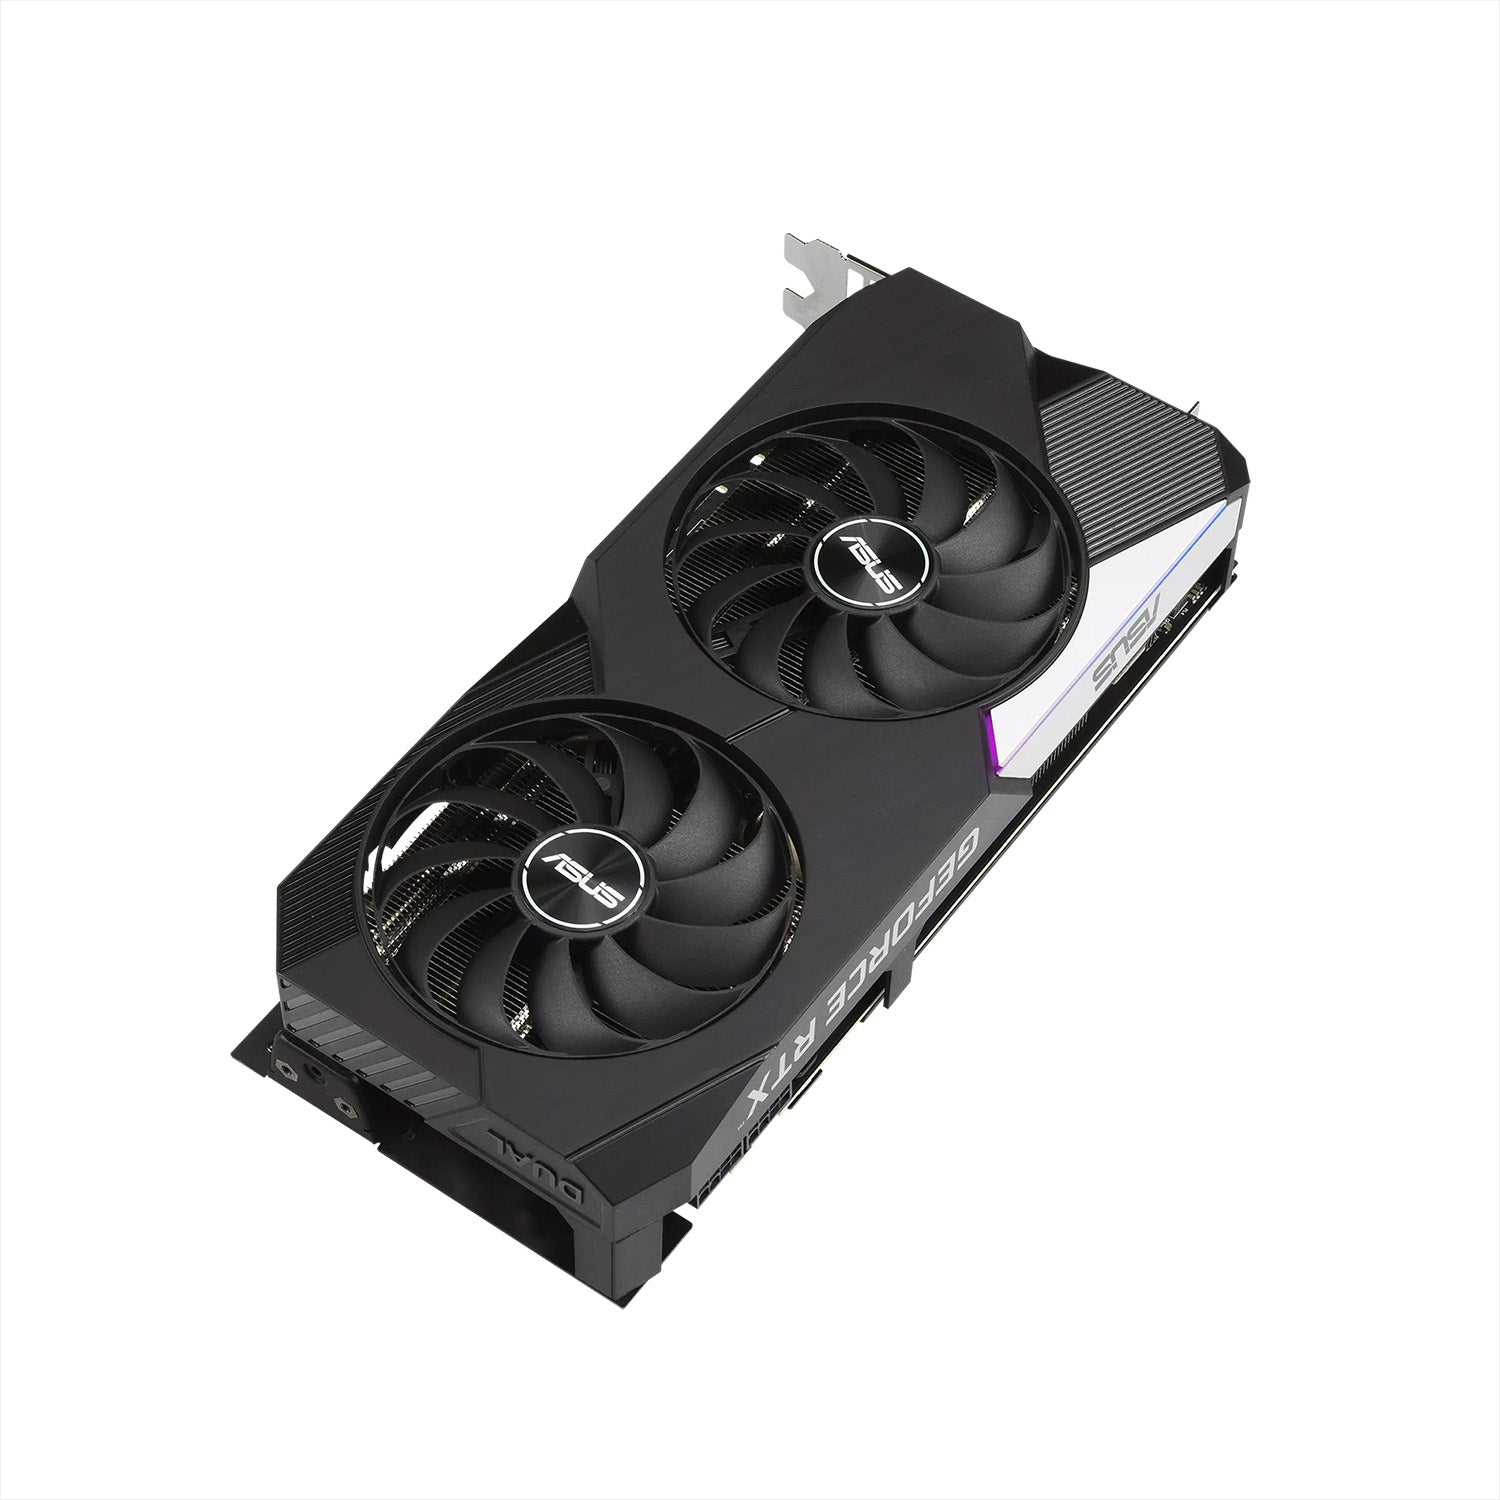 ASUS Dual GeForce RTX 3070 Graphics card, 8GB GDDR6, PCI Express 4.0 Video card, HDMI, Diaplay port, HDCP Support (DUAL-RTX3070-O8G-V2)